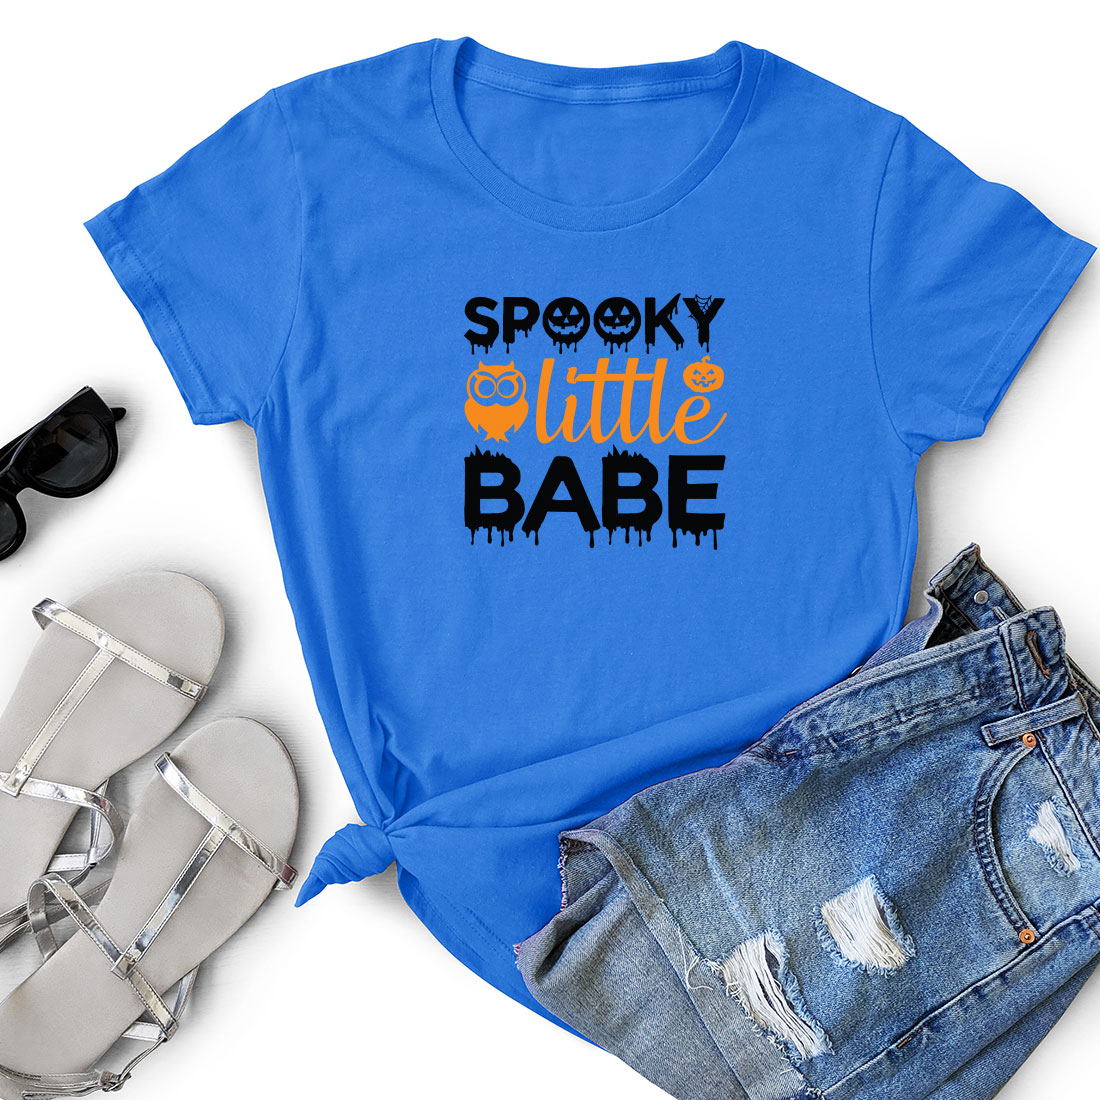 T - shirt that says spooky little babe next to a pair of.